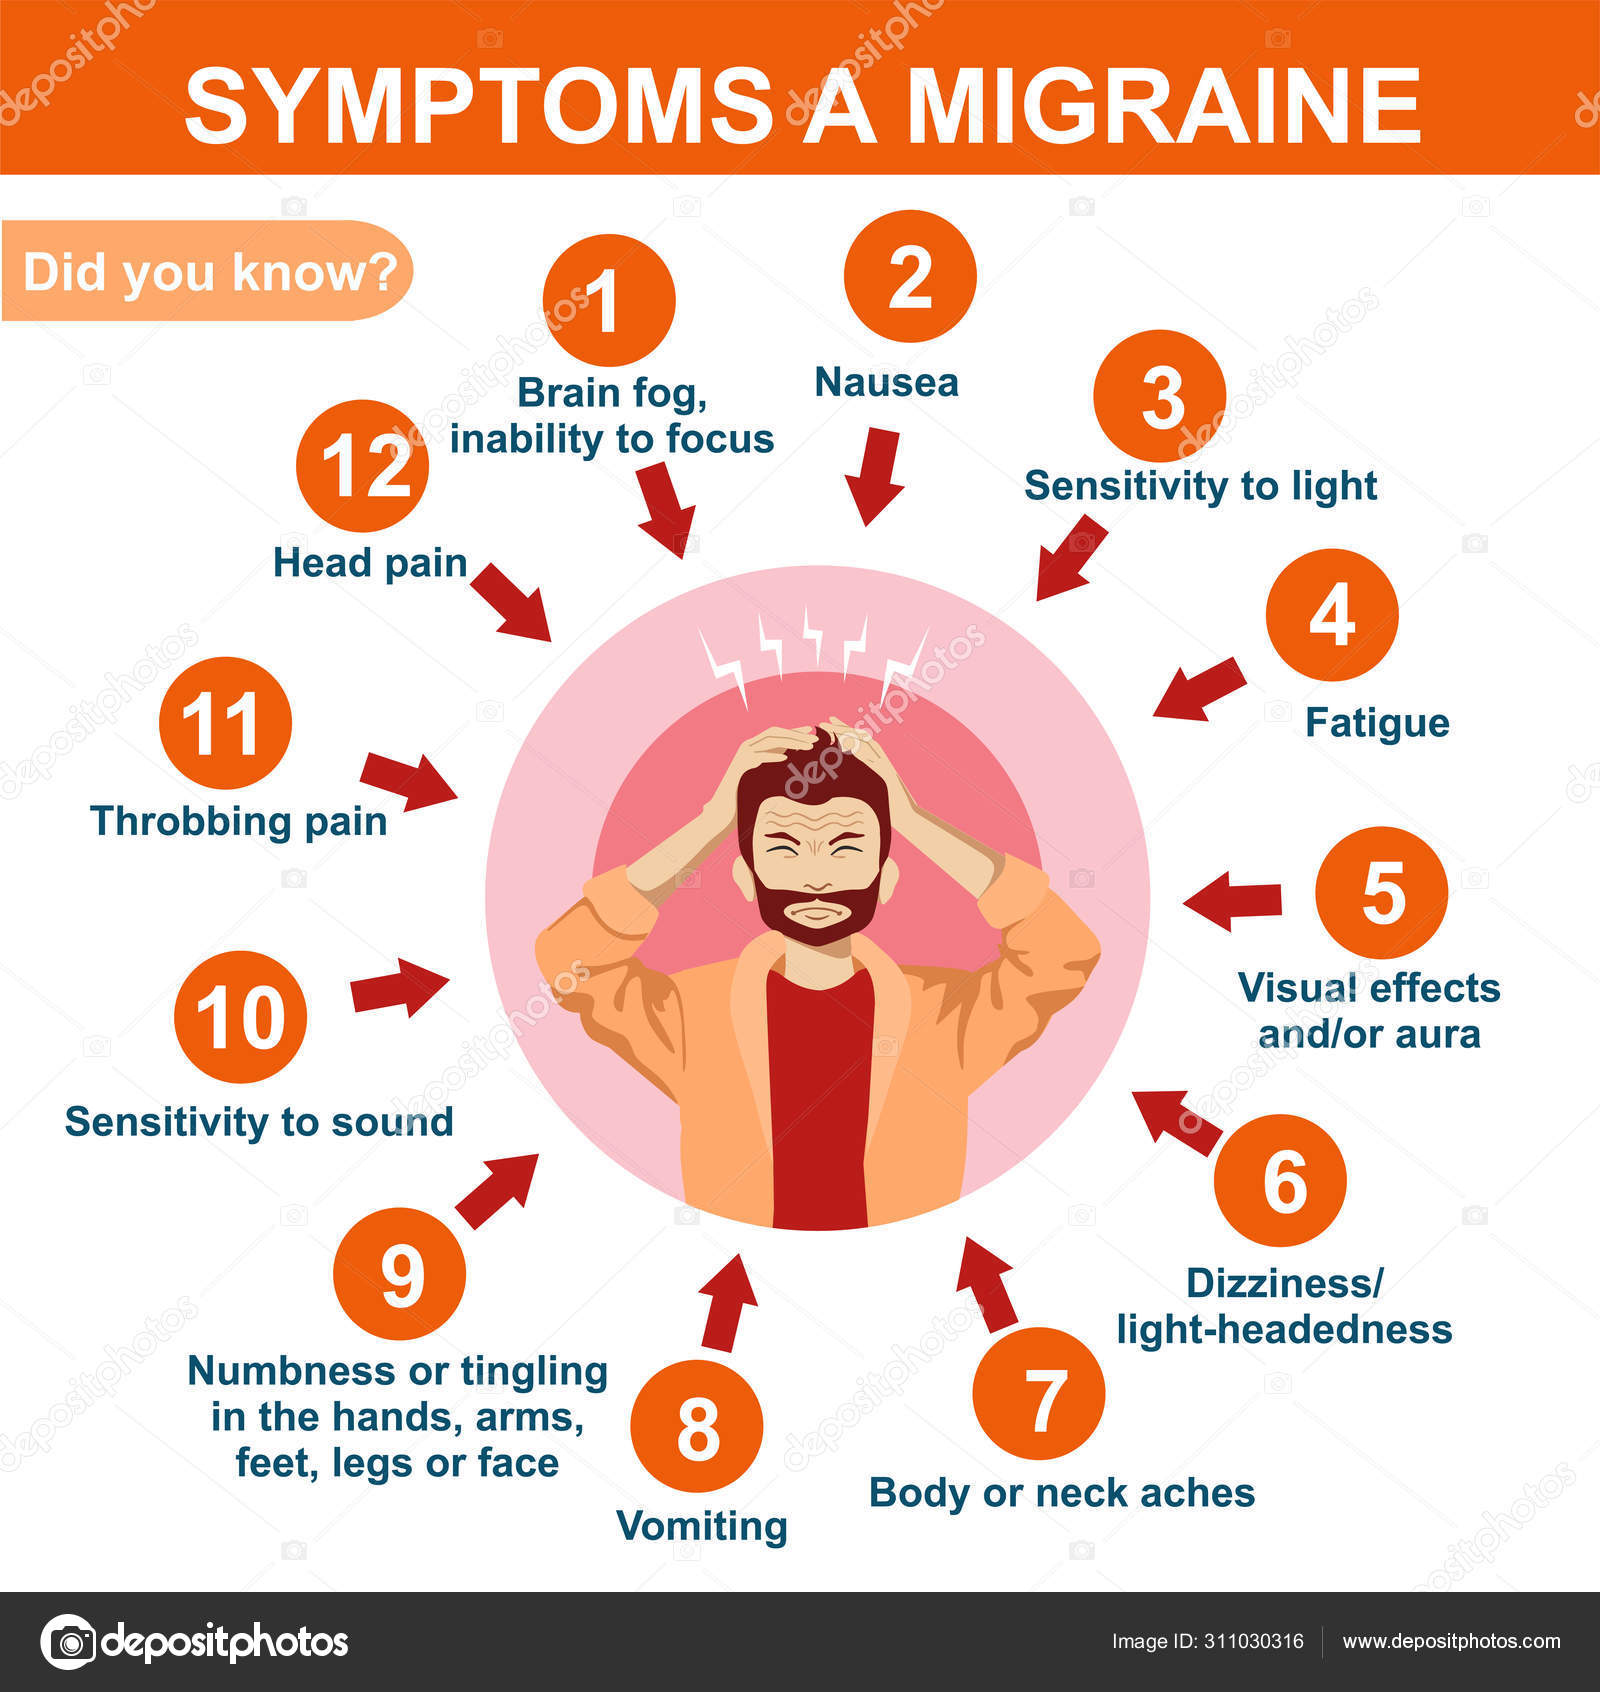 How to Recognize the Symptoms of a Migraine